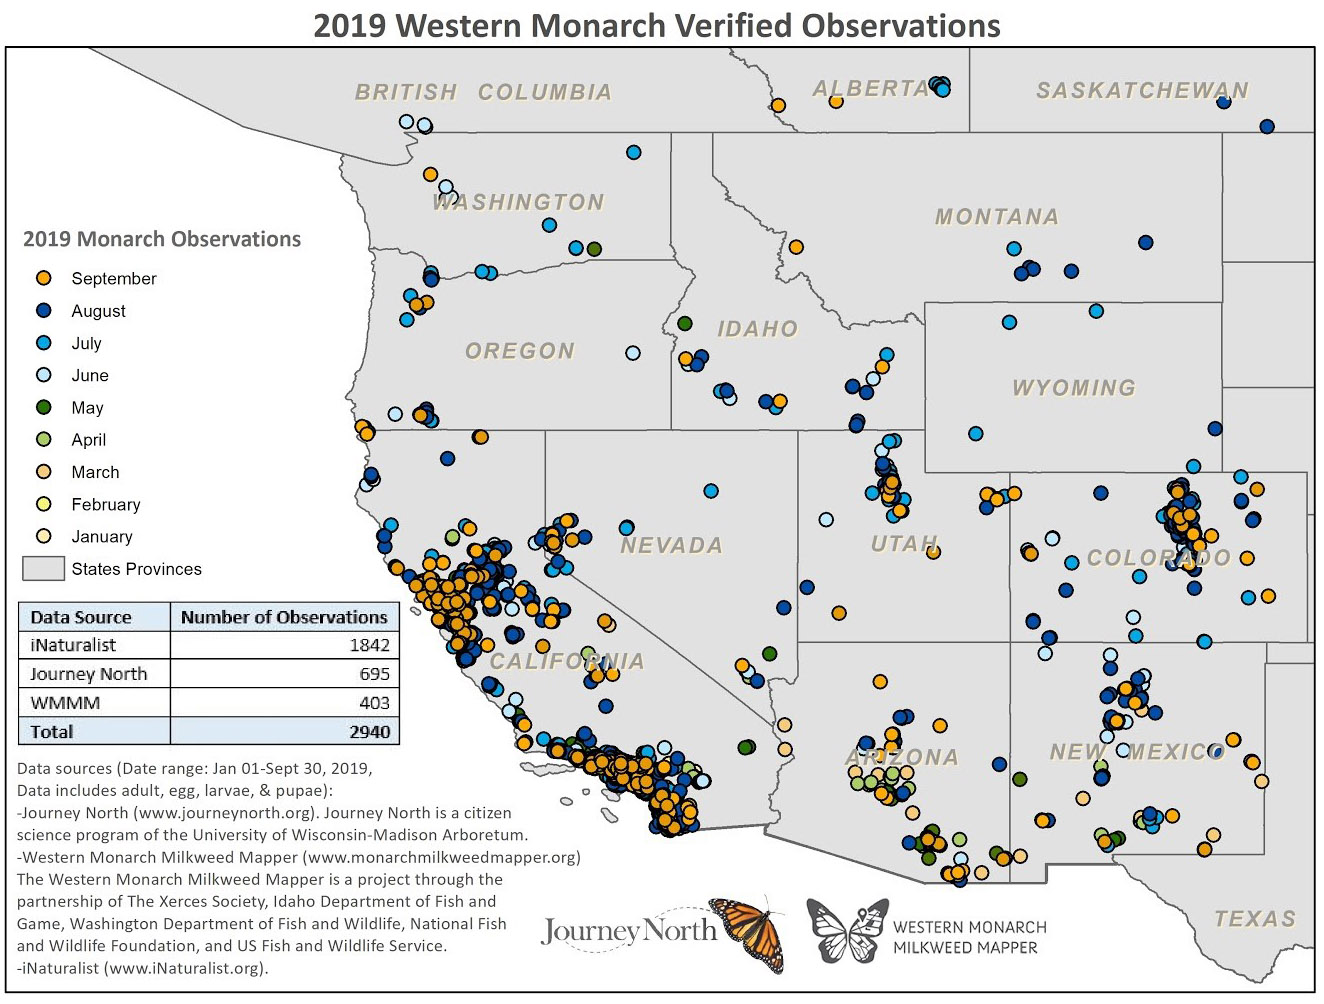 Map of the western United States and southern Canada showing locations of monarch observations during 2019.